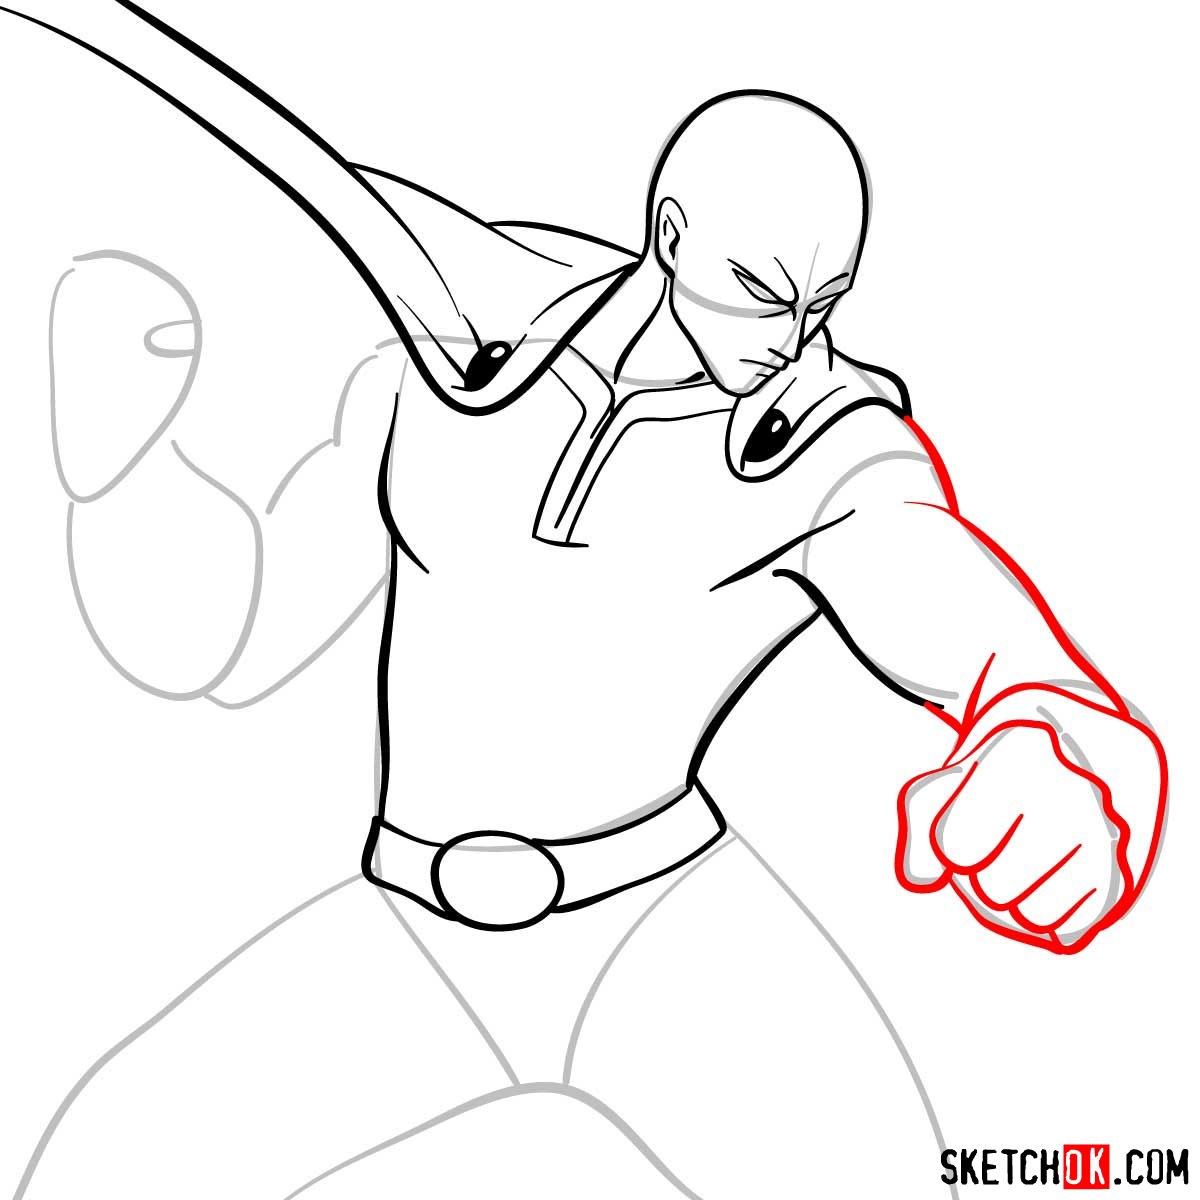 How to draw fighting Saitama in 12 steps - step 08